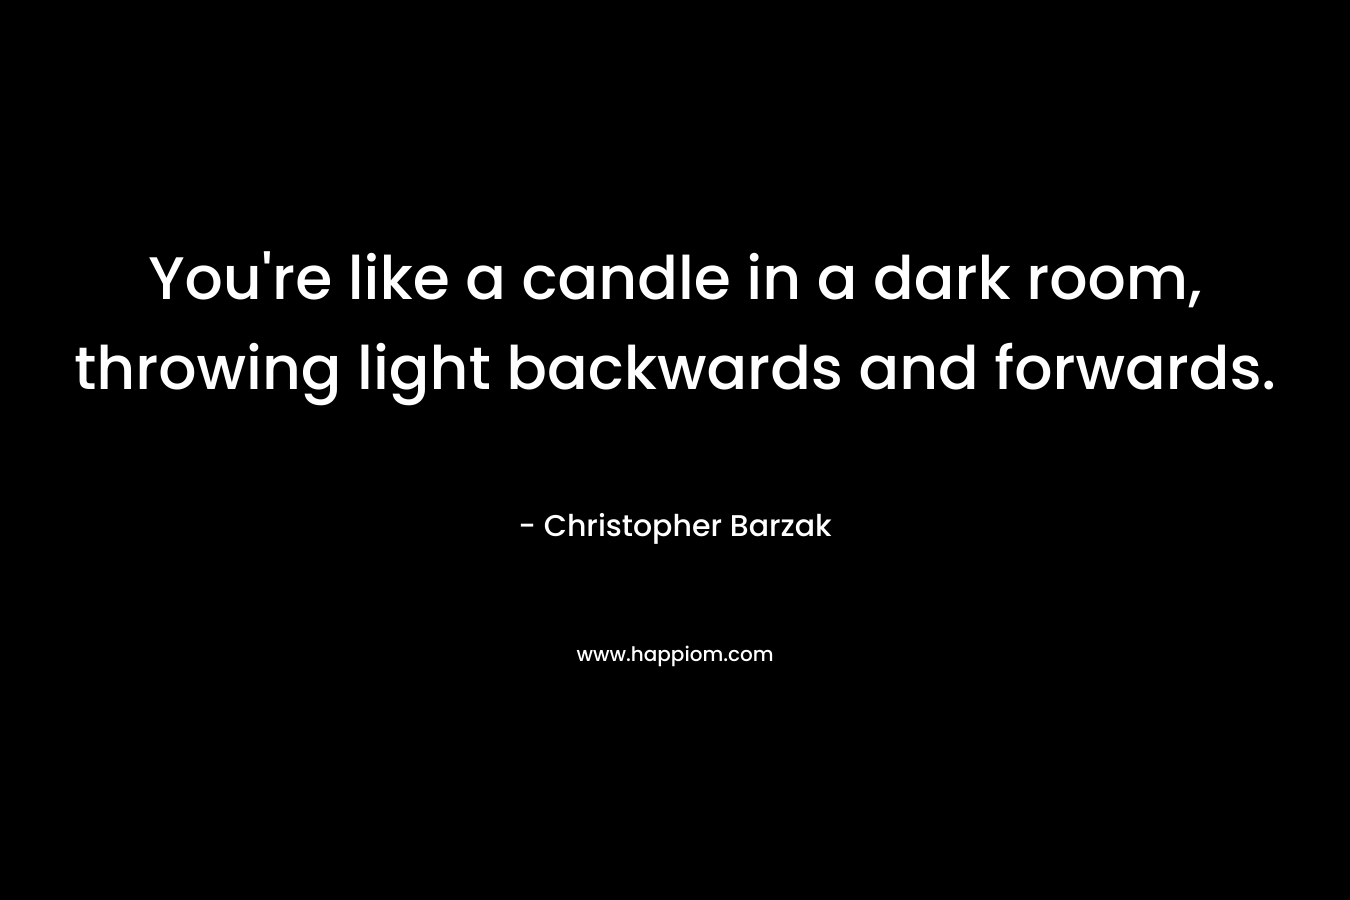 You’re like a candle in a dark room, throwing light backwards and forwards. – Christopher Barzak